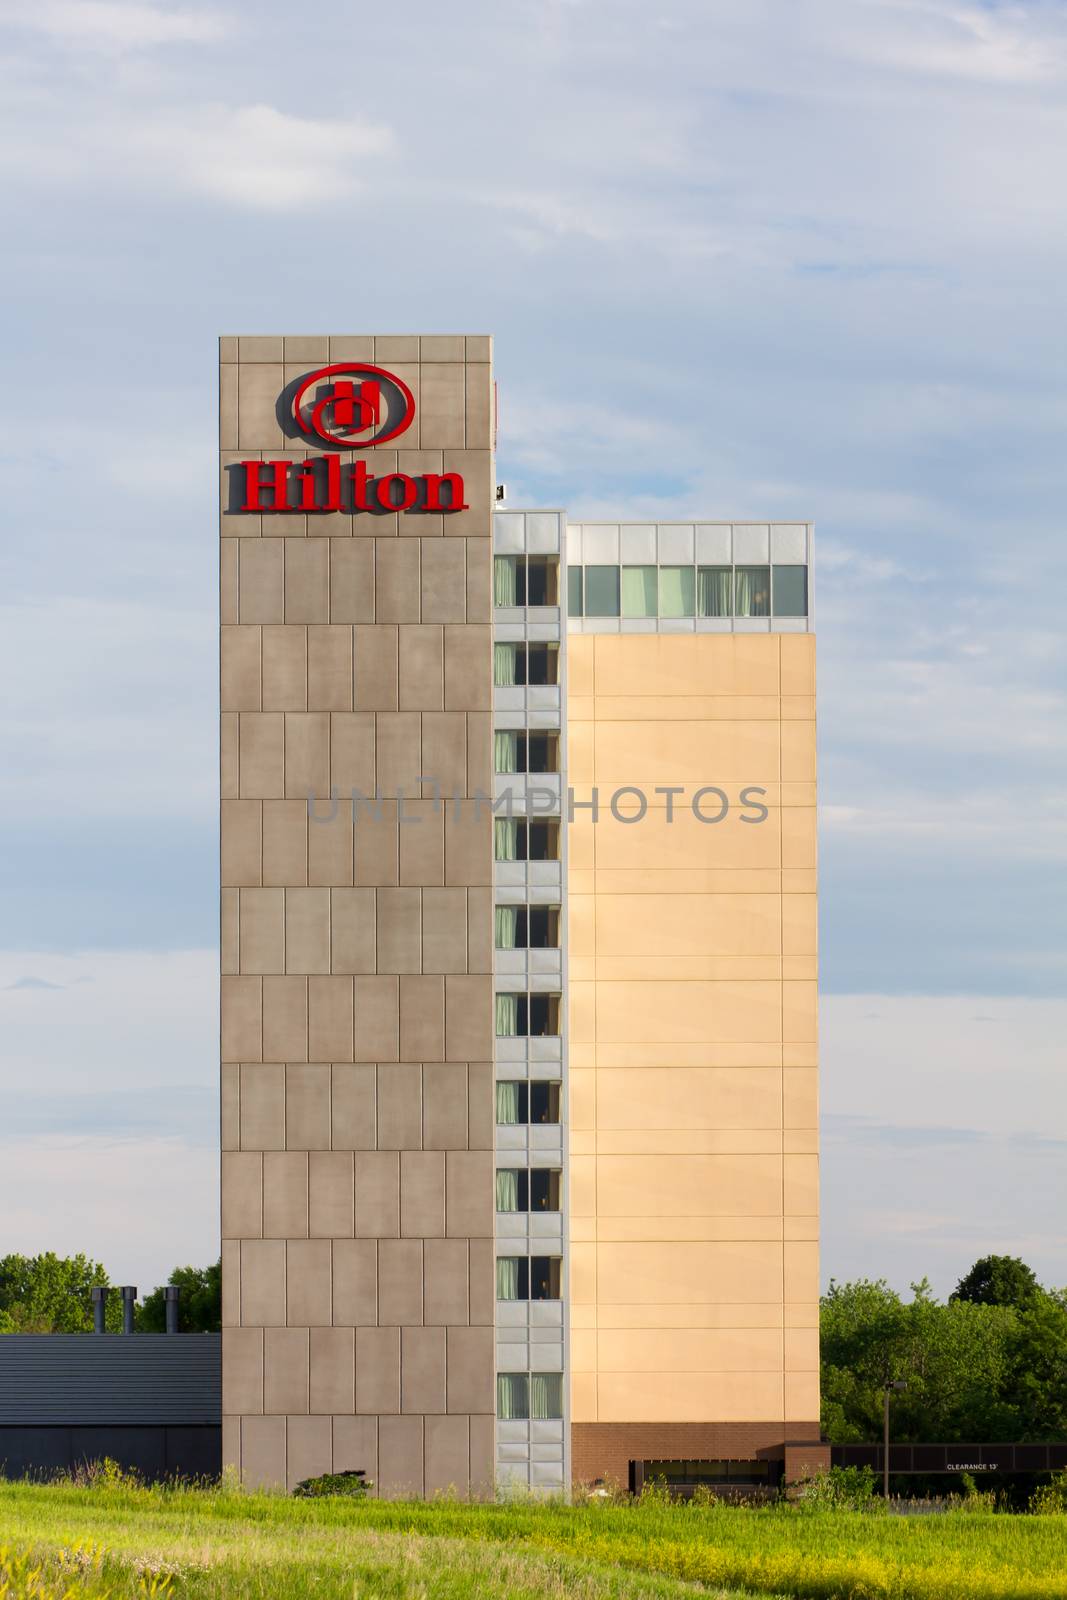 BLOOMINGTON, MN/USA - JUNE 22, 2014: Hilton hotel exterior. Hilton is an international chain of full service hotels and resorts and the flagship brand of Hilton Worldwide.